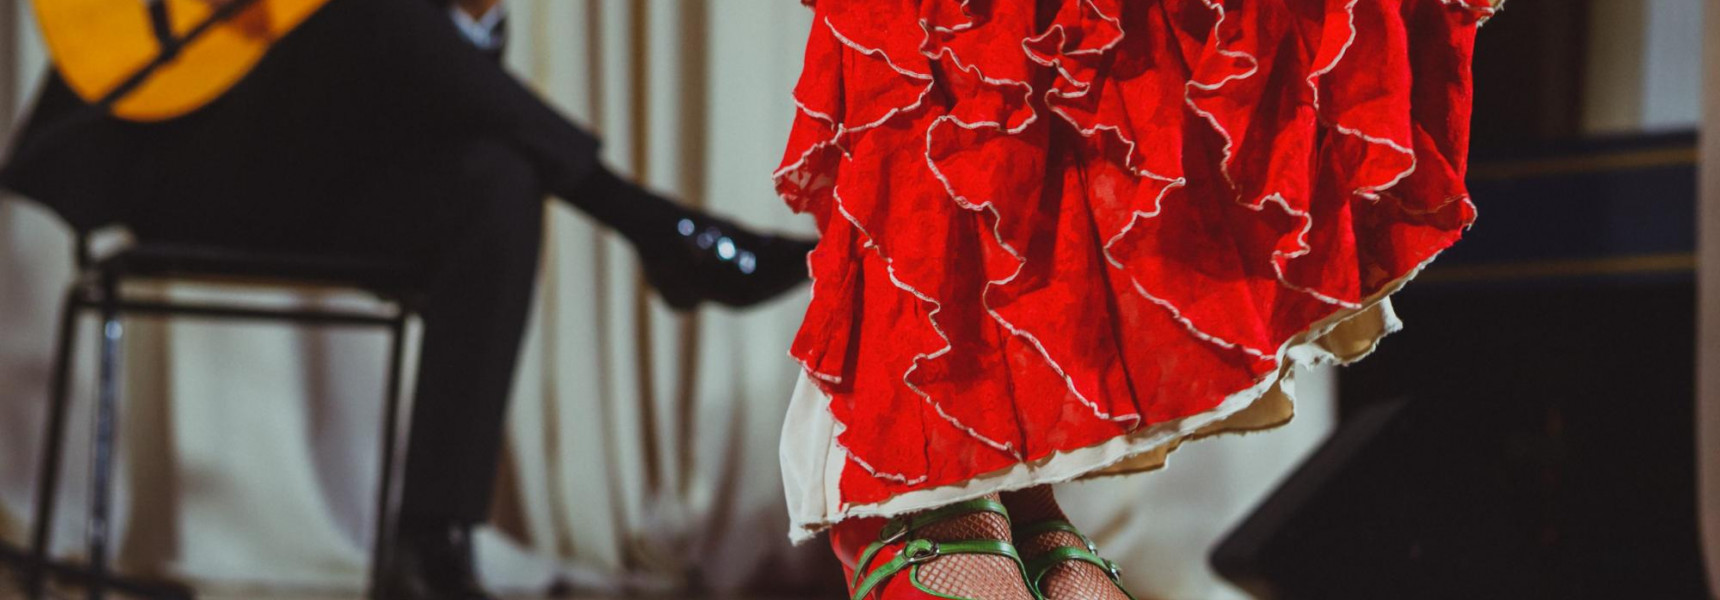 Top 5 Flamenco and Dinner Experiences in Barcelona